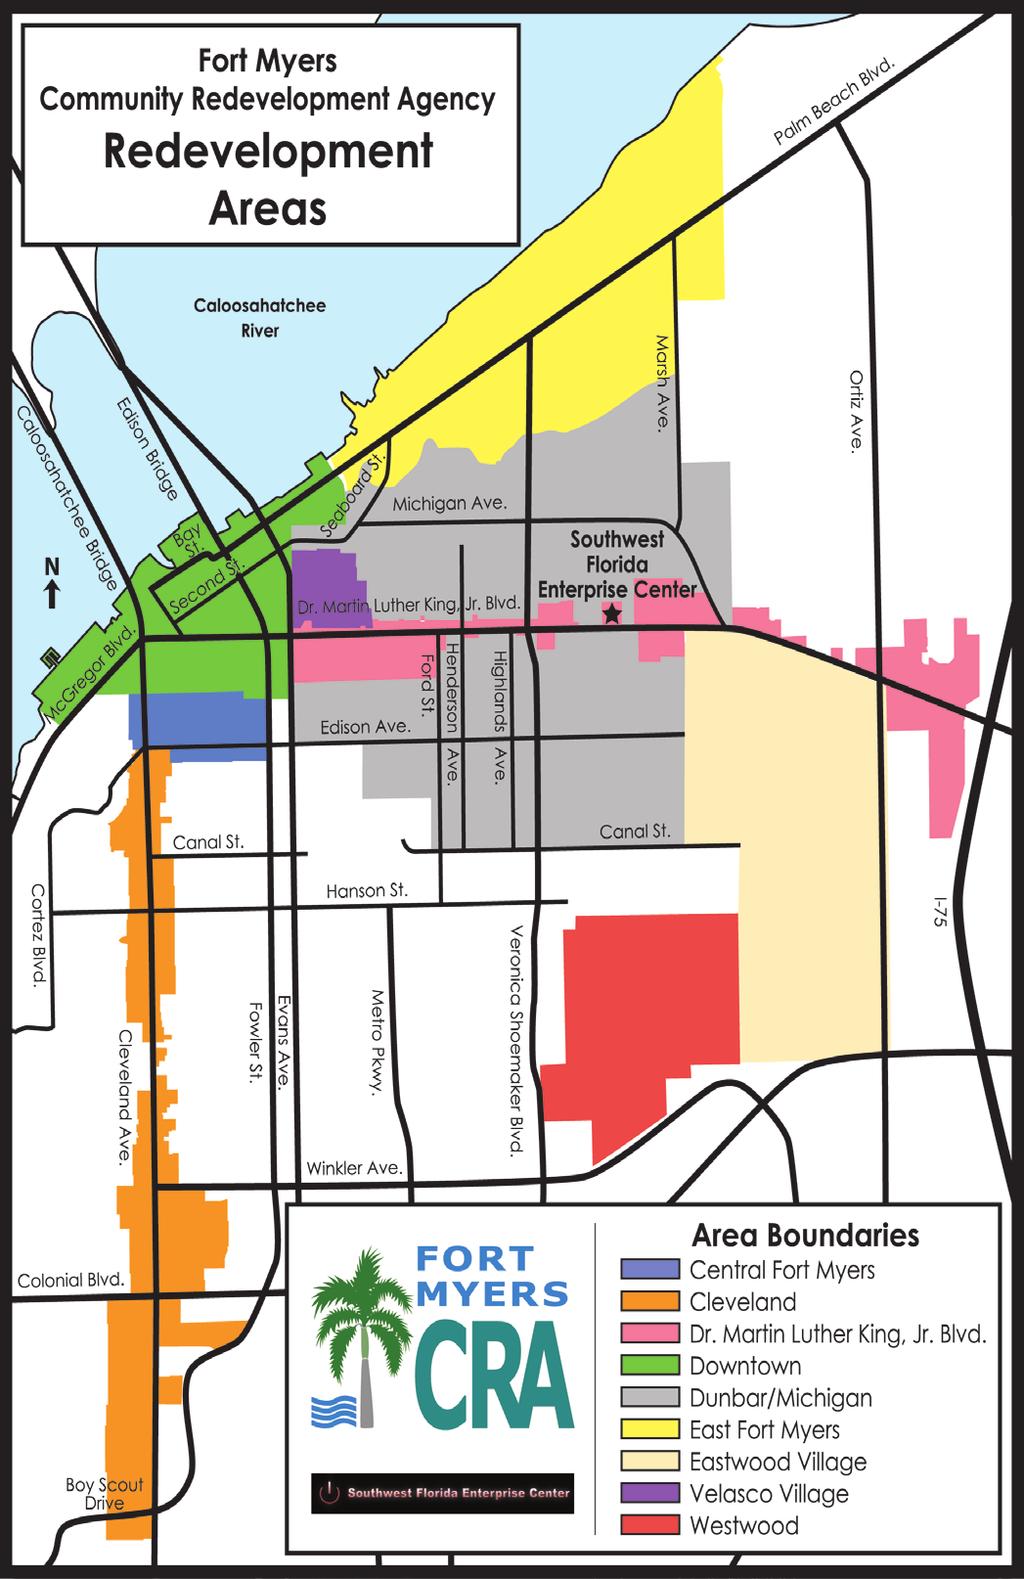 About Fort Myers CRA The Fort Myers CRA consists of two parts, the Redevelopment Division and the Southwest Florida Enterprise Center Division.